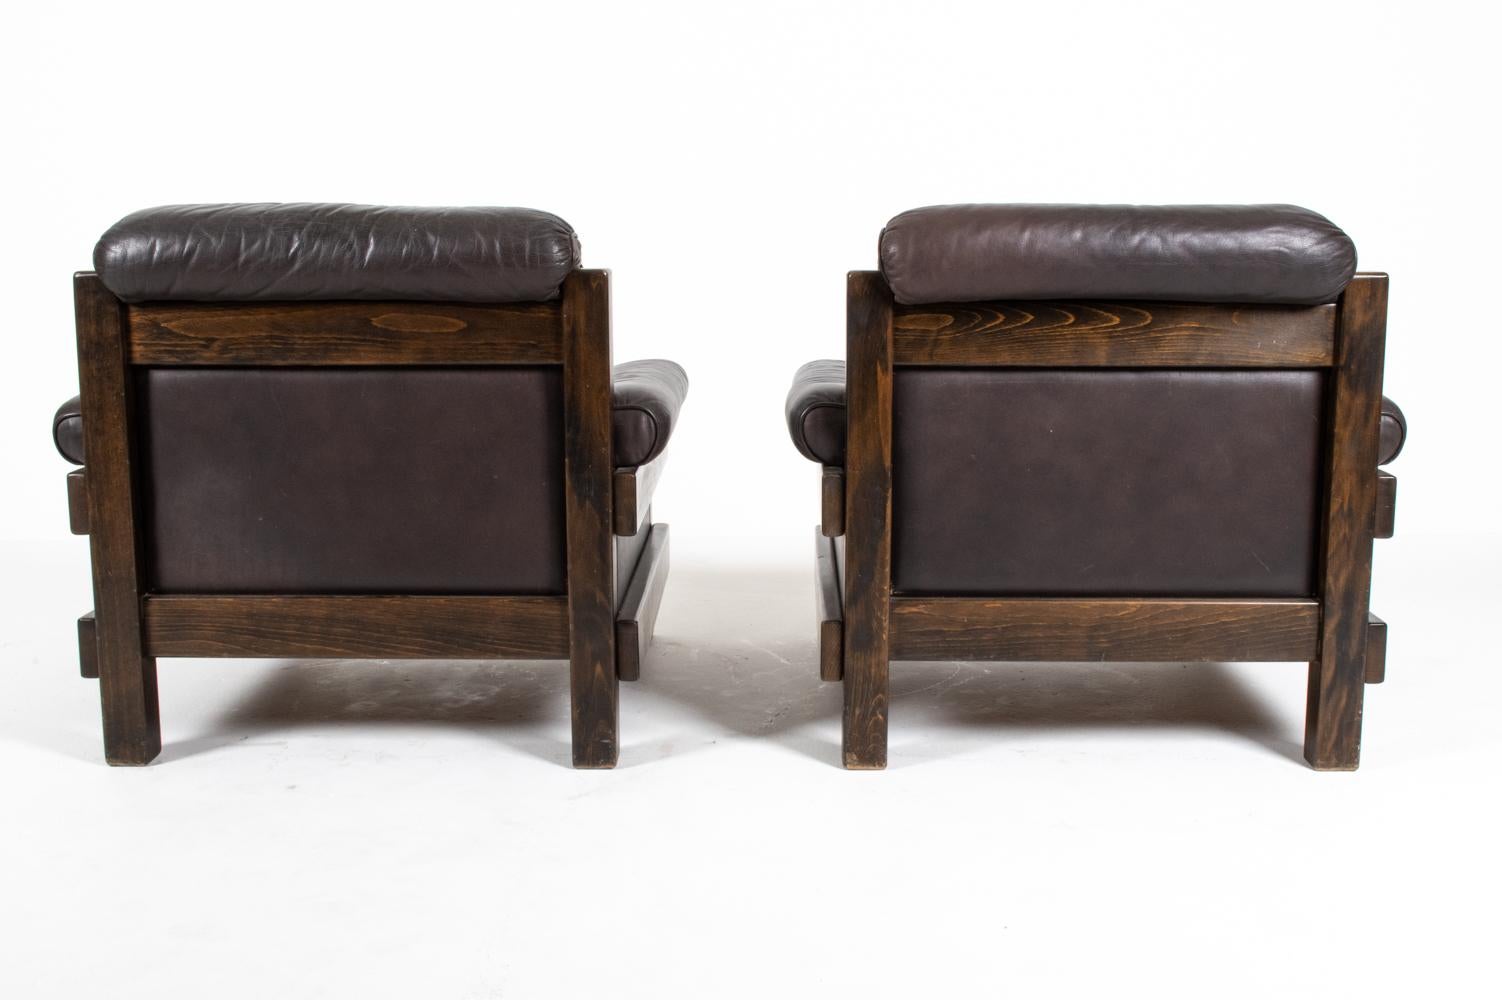 Pair of Swedish Mid-Century Tufted Leather Lounge Chairs by Ikea, 1970's For Sale 6